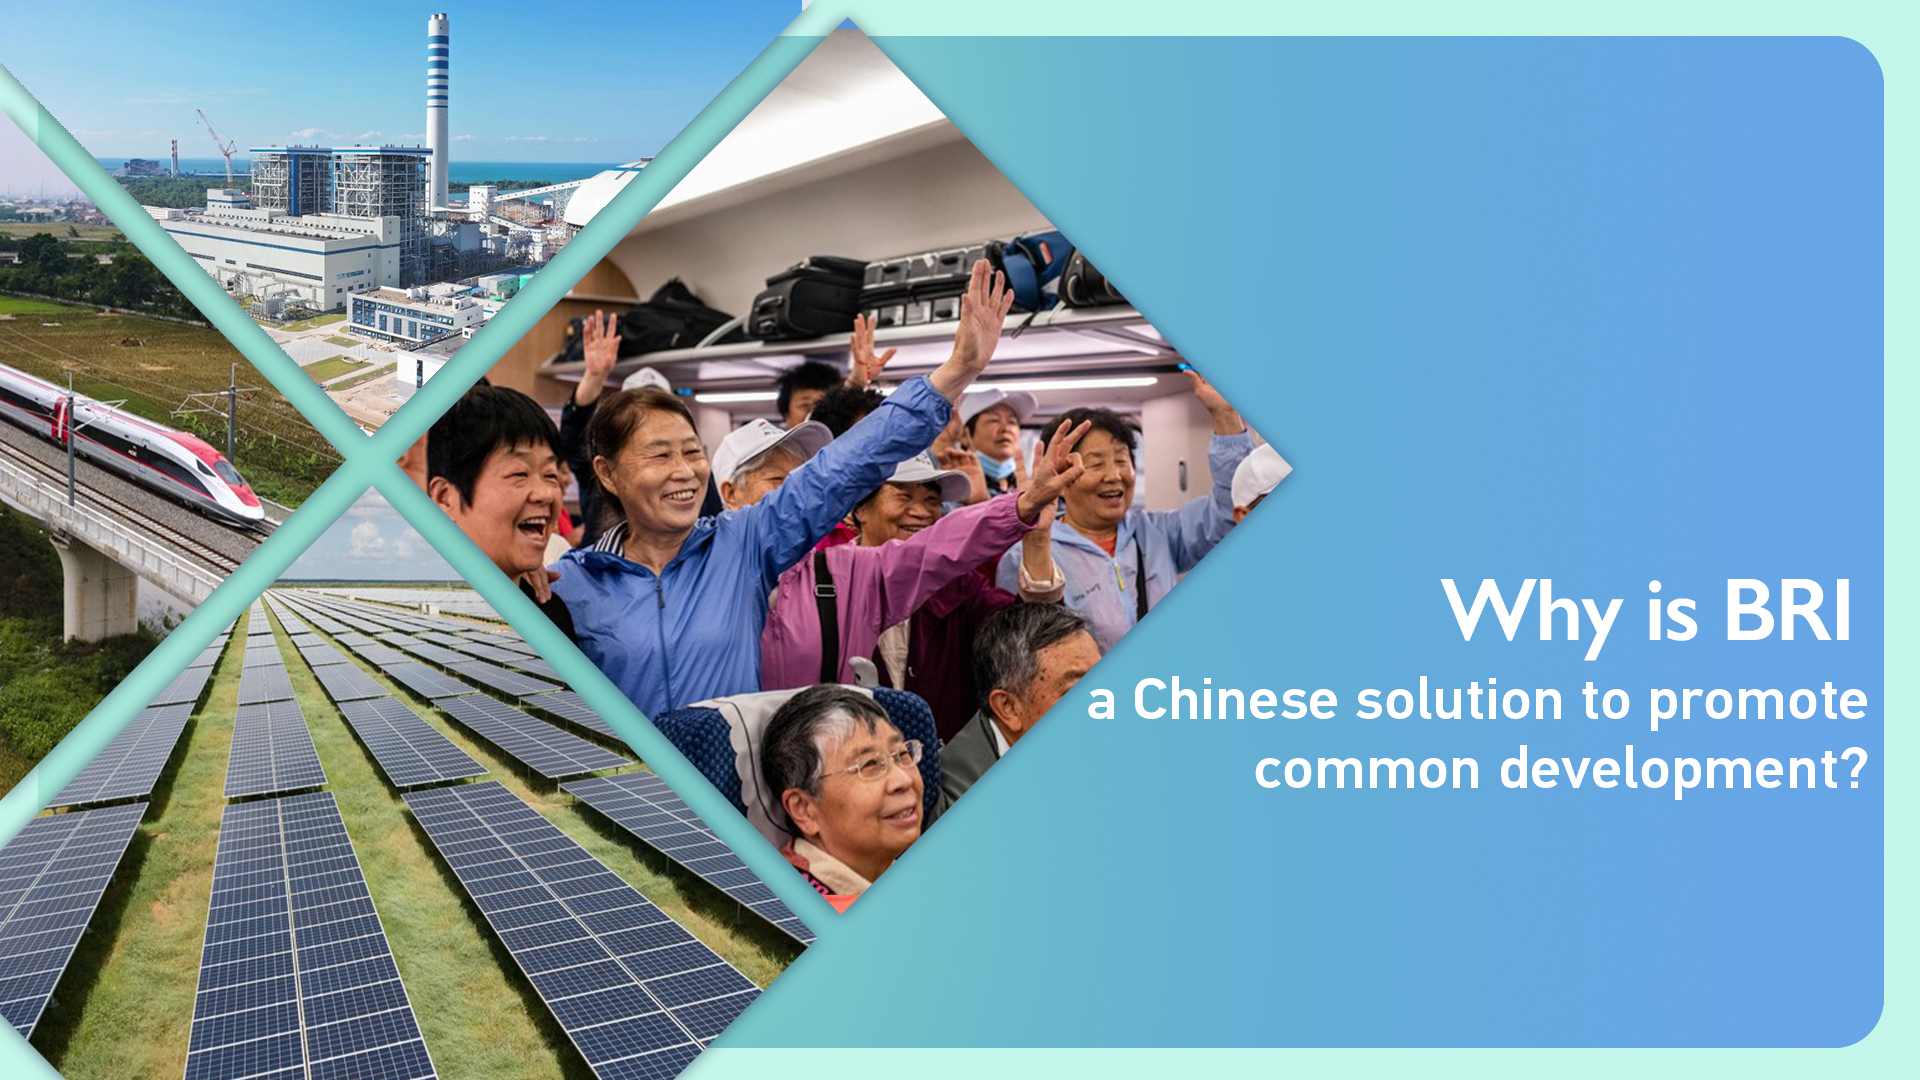 Why is BRI a Chinese solution to promote common development?